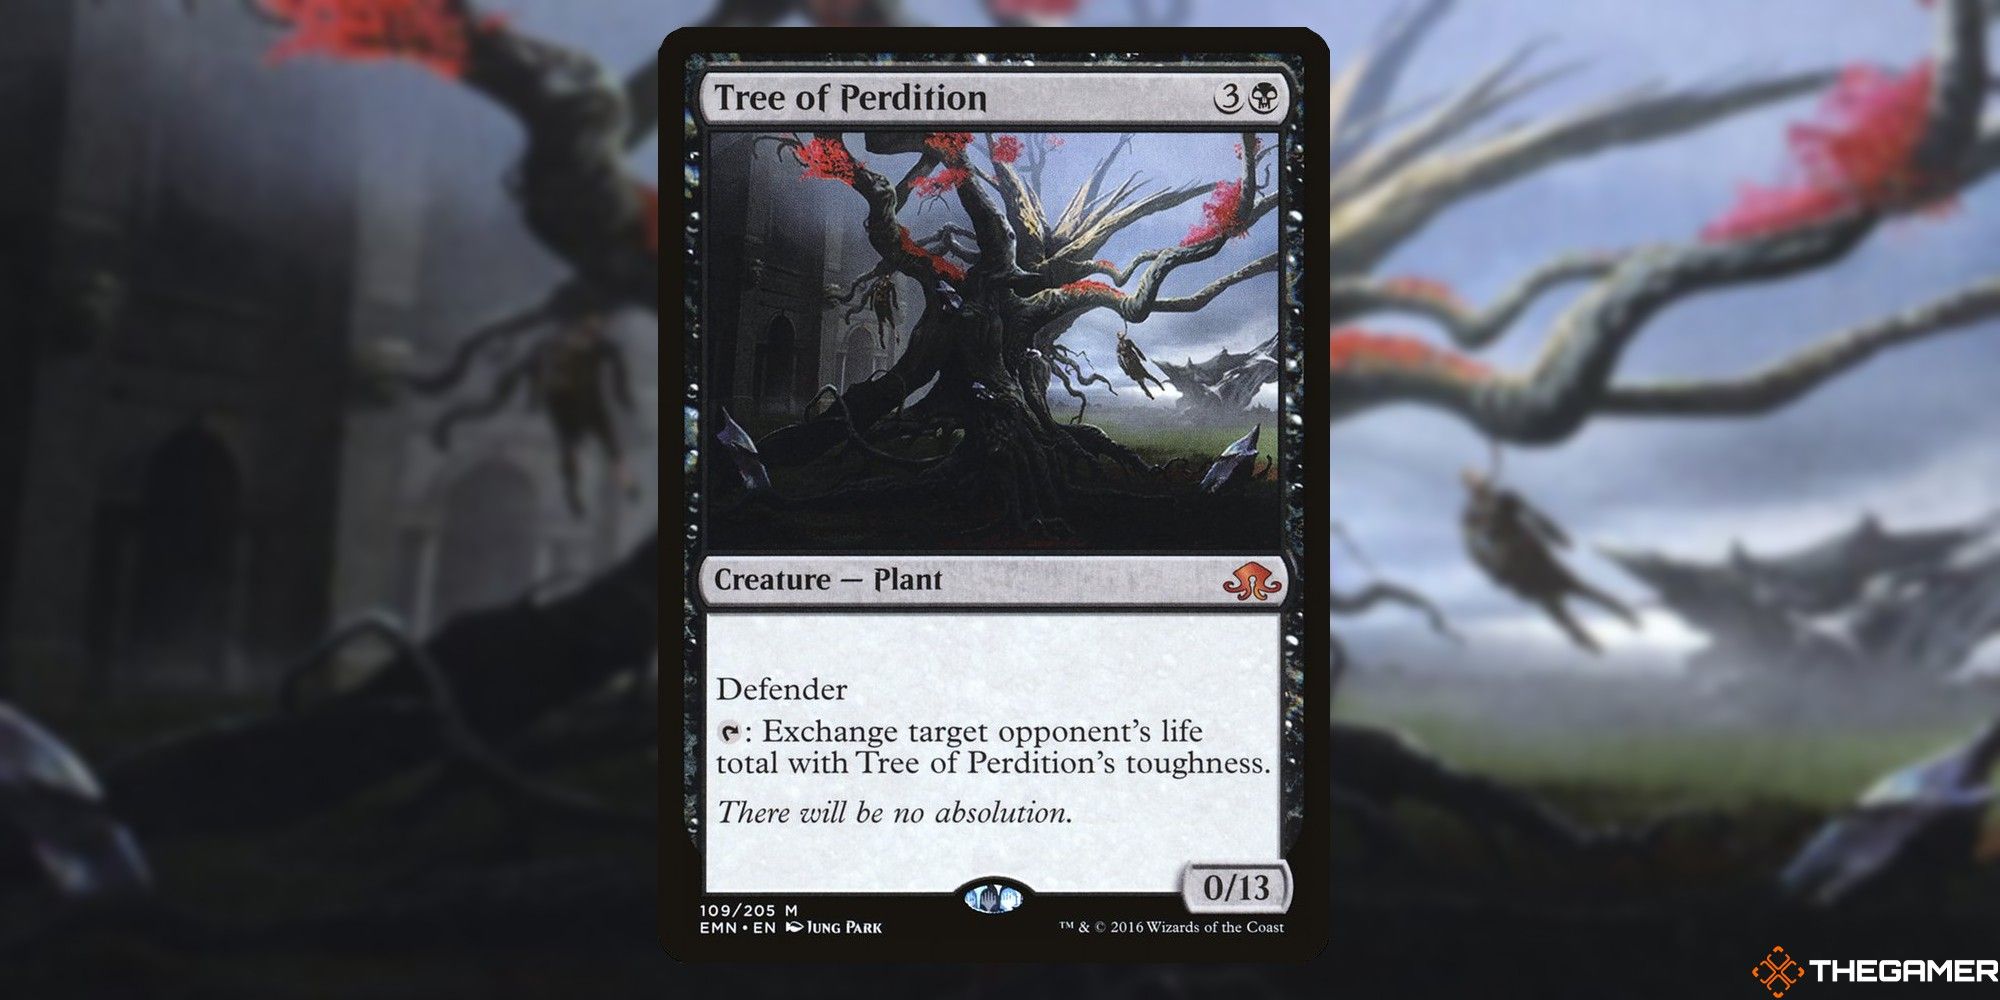 Perdition tree card and art background